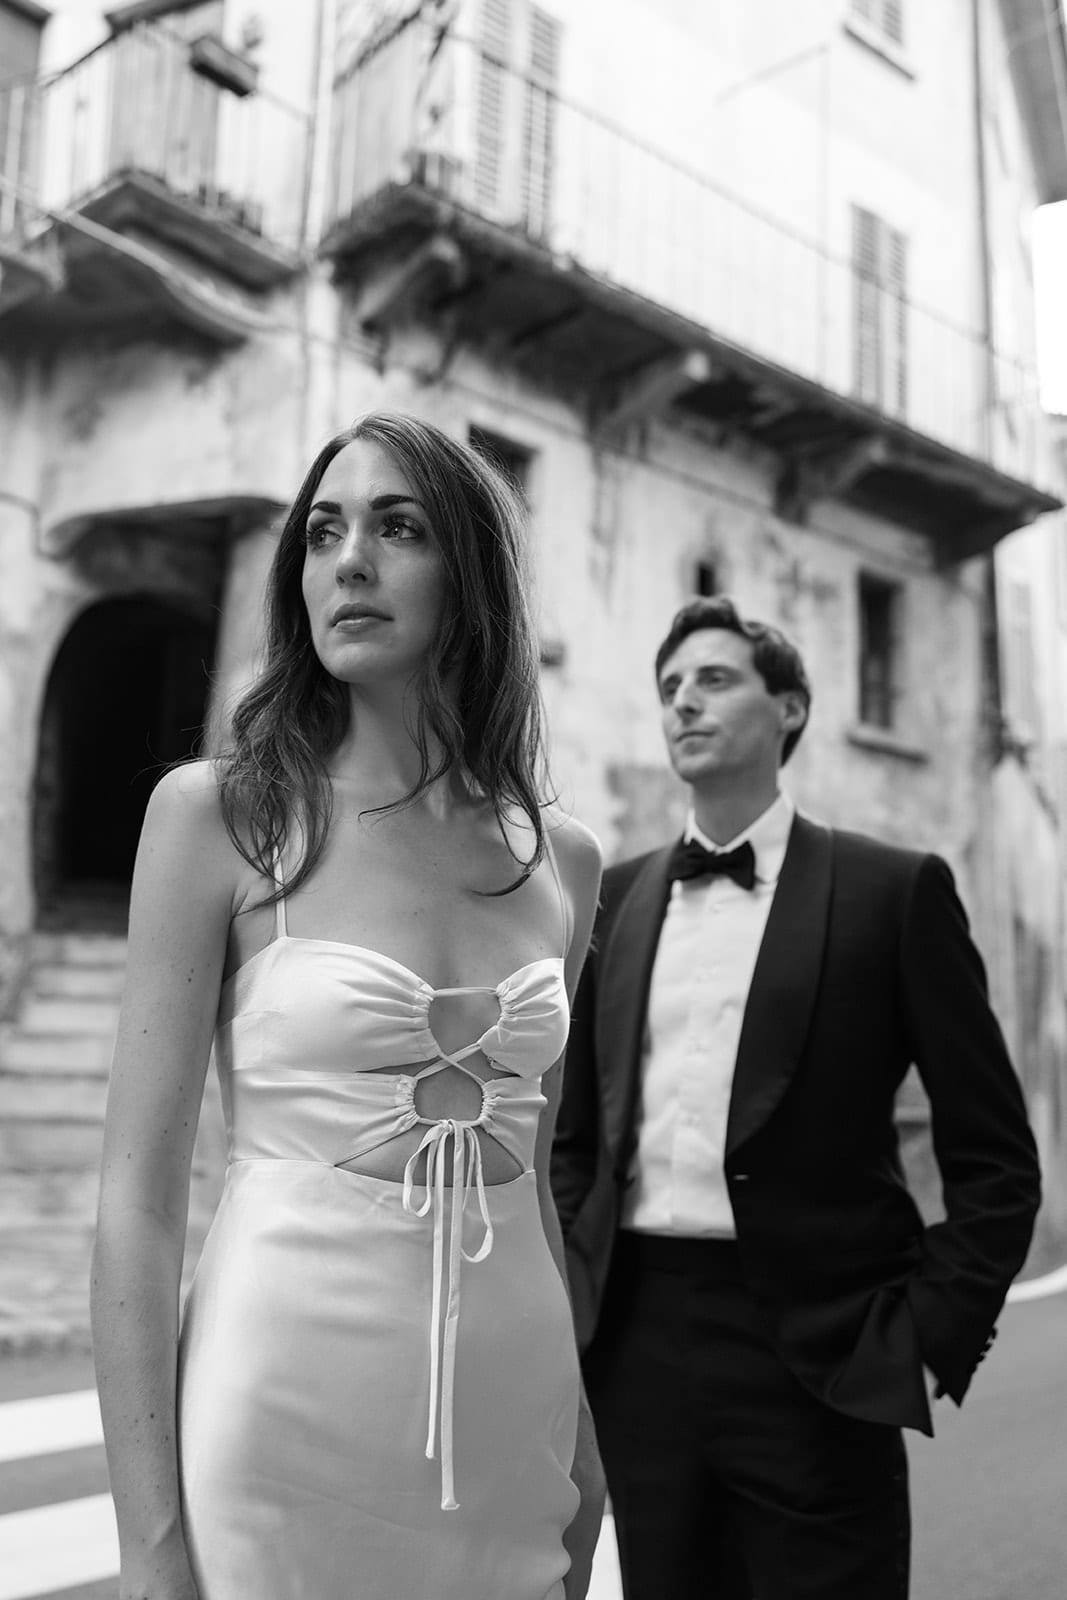 Bride and groom stand together in the streets of Italy